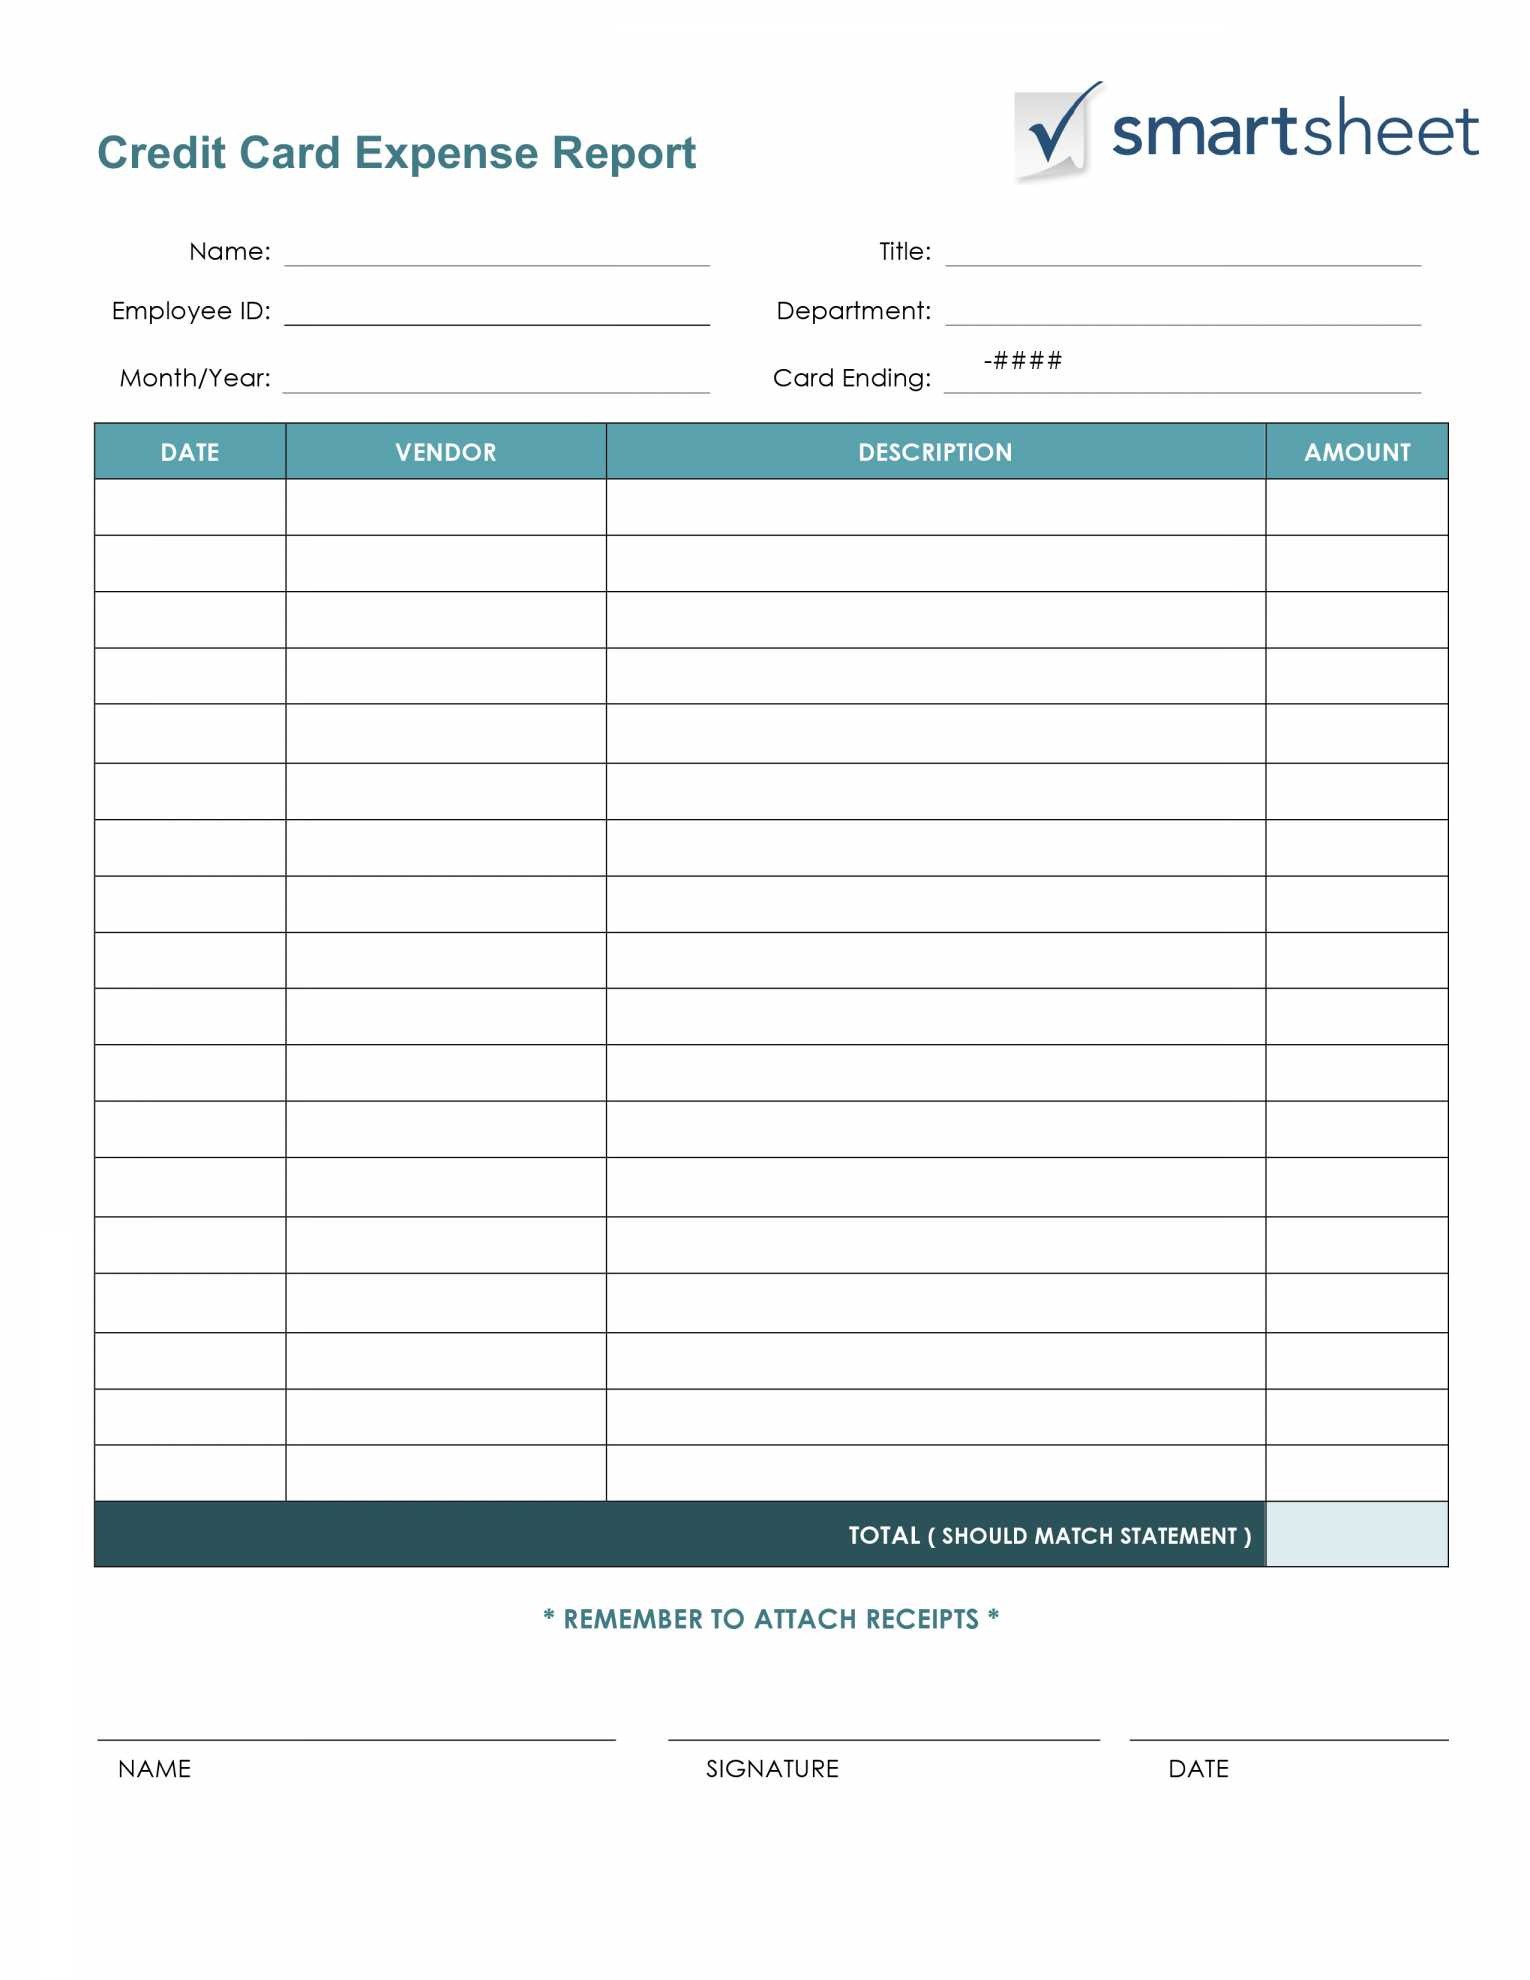 15 Premium Tax Template For Expenses Lancerules Worksheet Document Business Expense Taxes